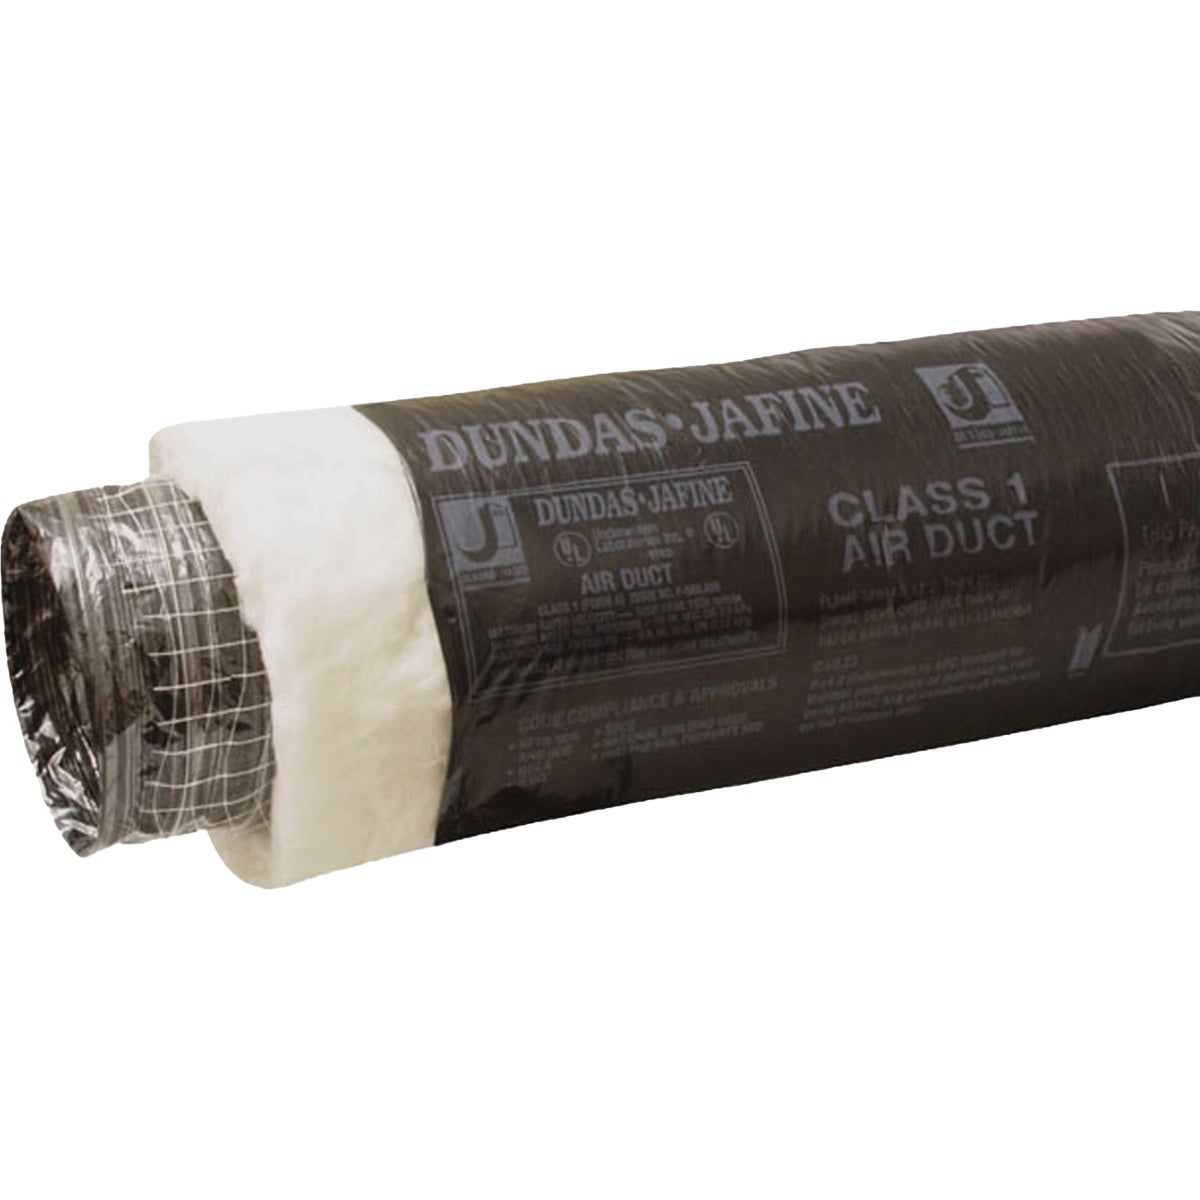 Dundas Jafine 4 In. I.D. x 25 Ft. R6.0 Black Jacket Flexible Insulated Ducting